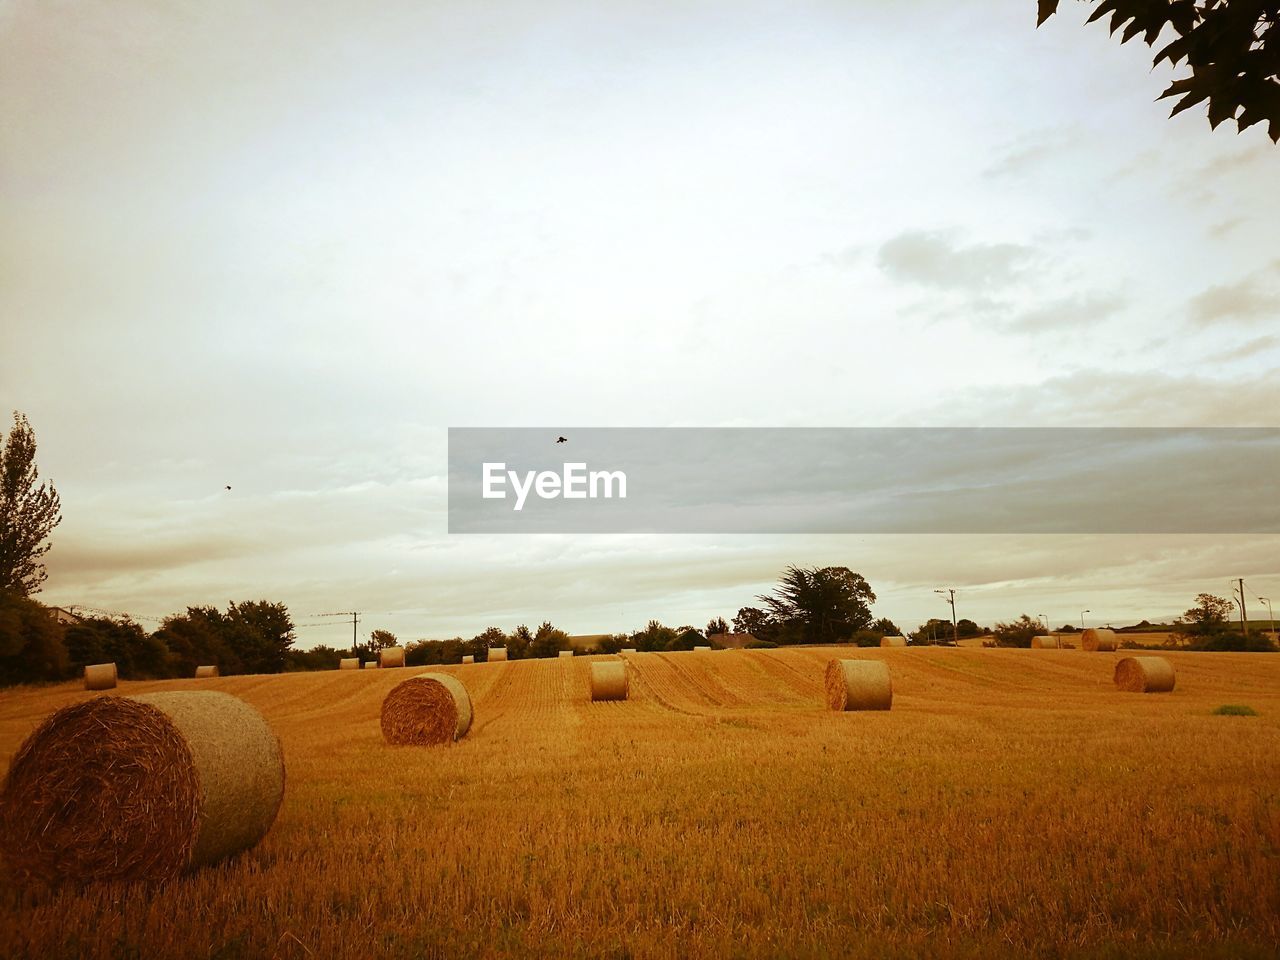 HAY BALES ON AGRICULTURAL FIELD AGAINST SKY